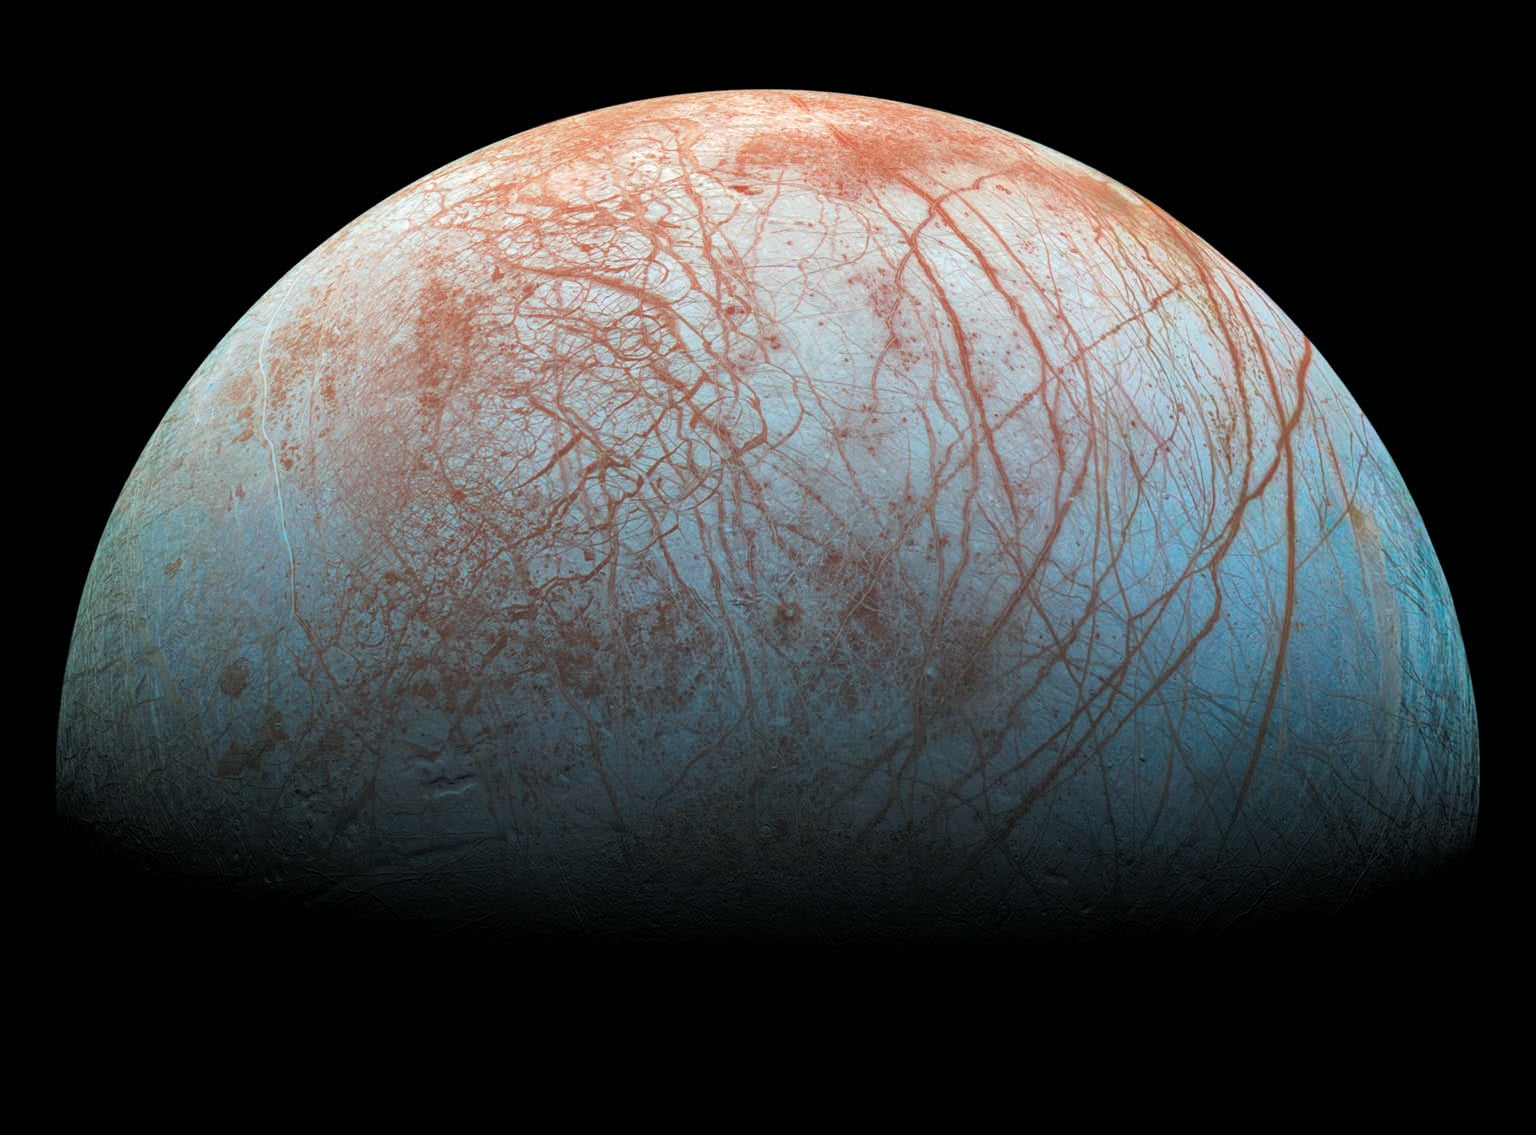 View of Jupiter’s moon Europa, shown against a black backdrop.